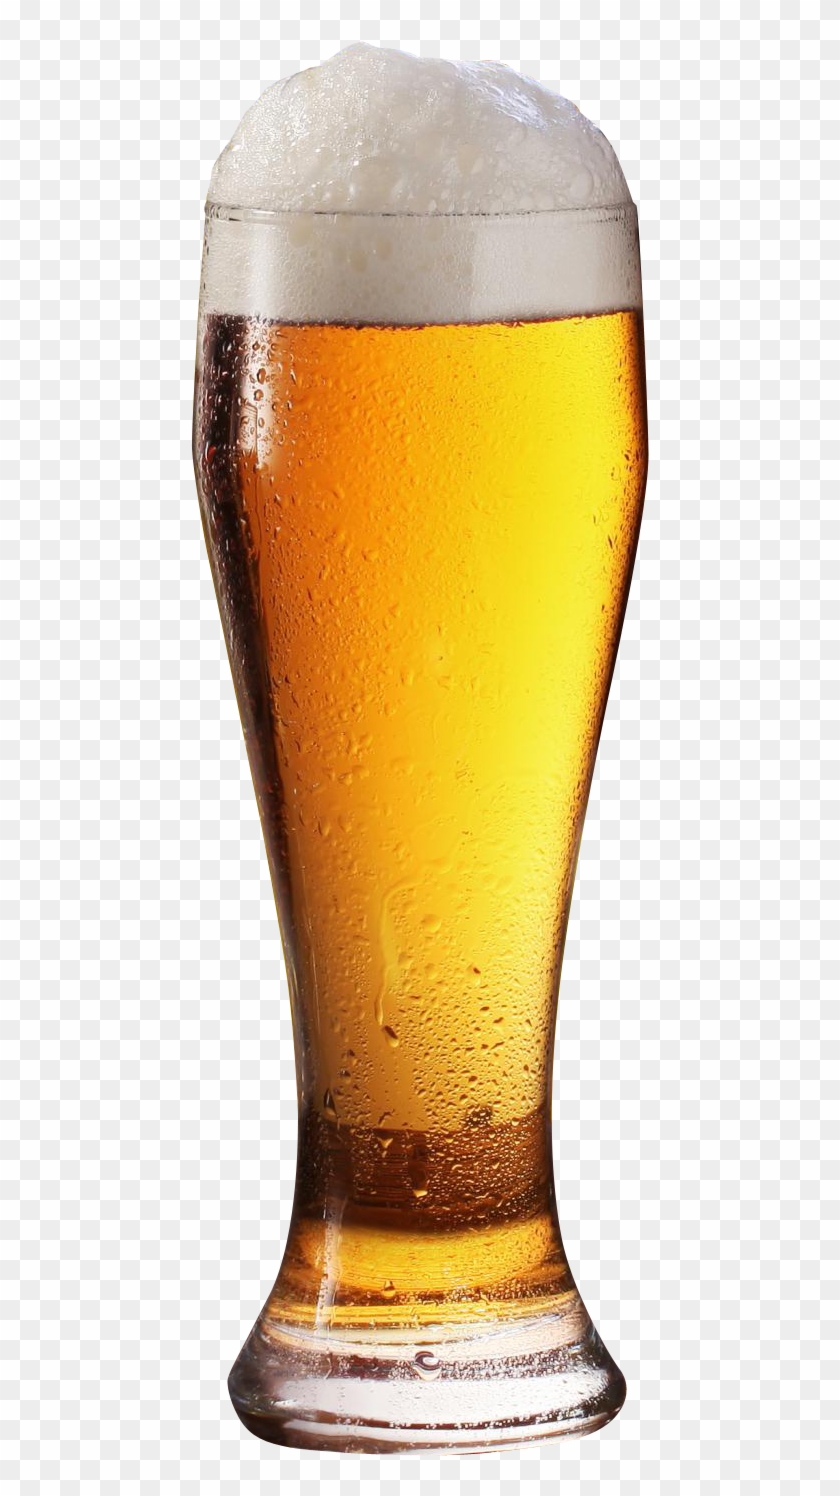 Beer Glass Png Image - Beer Glass Png Image #1530757